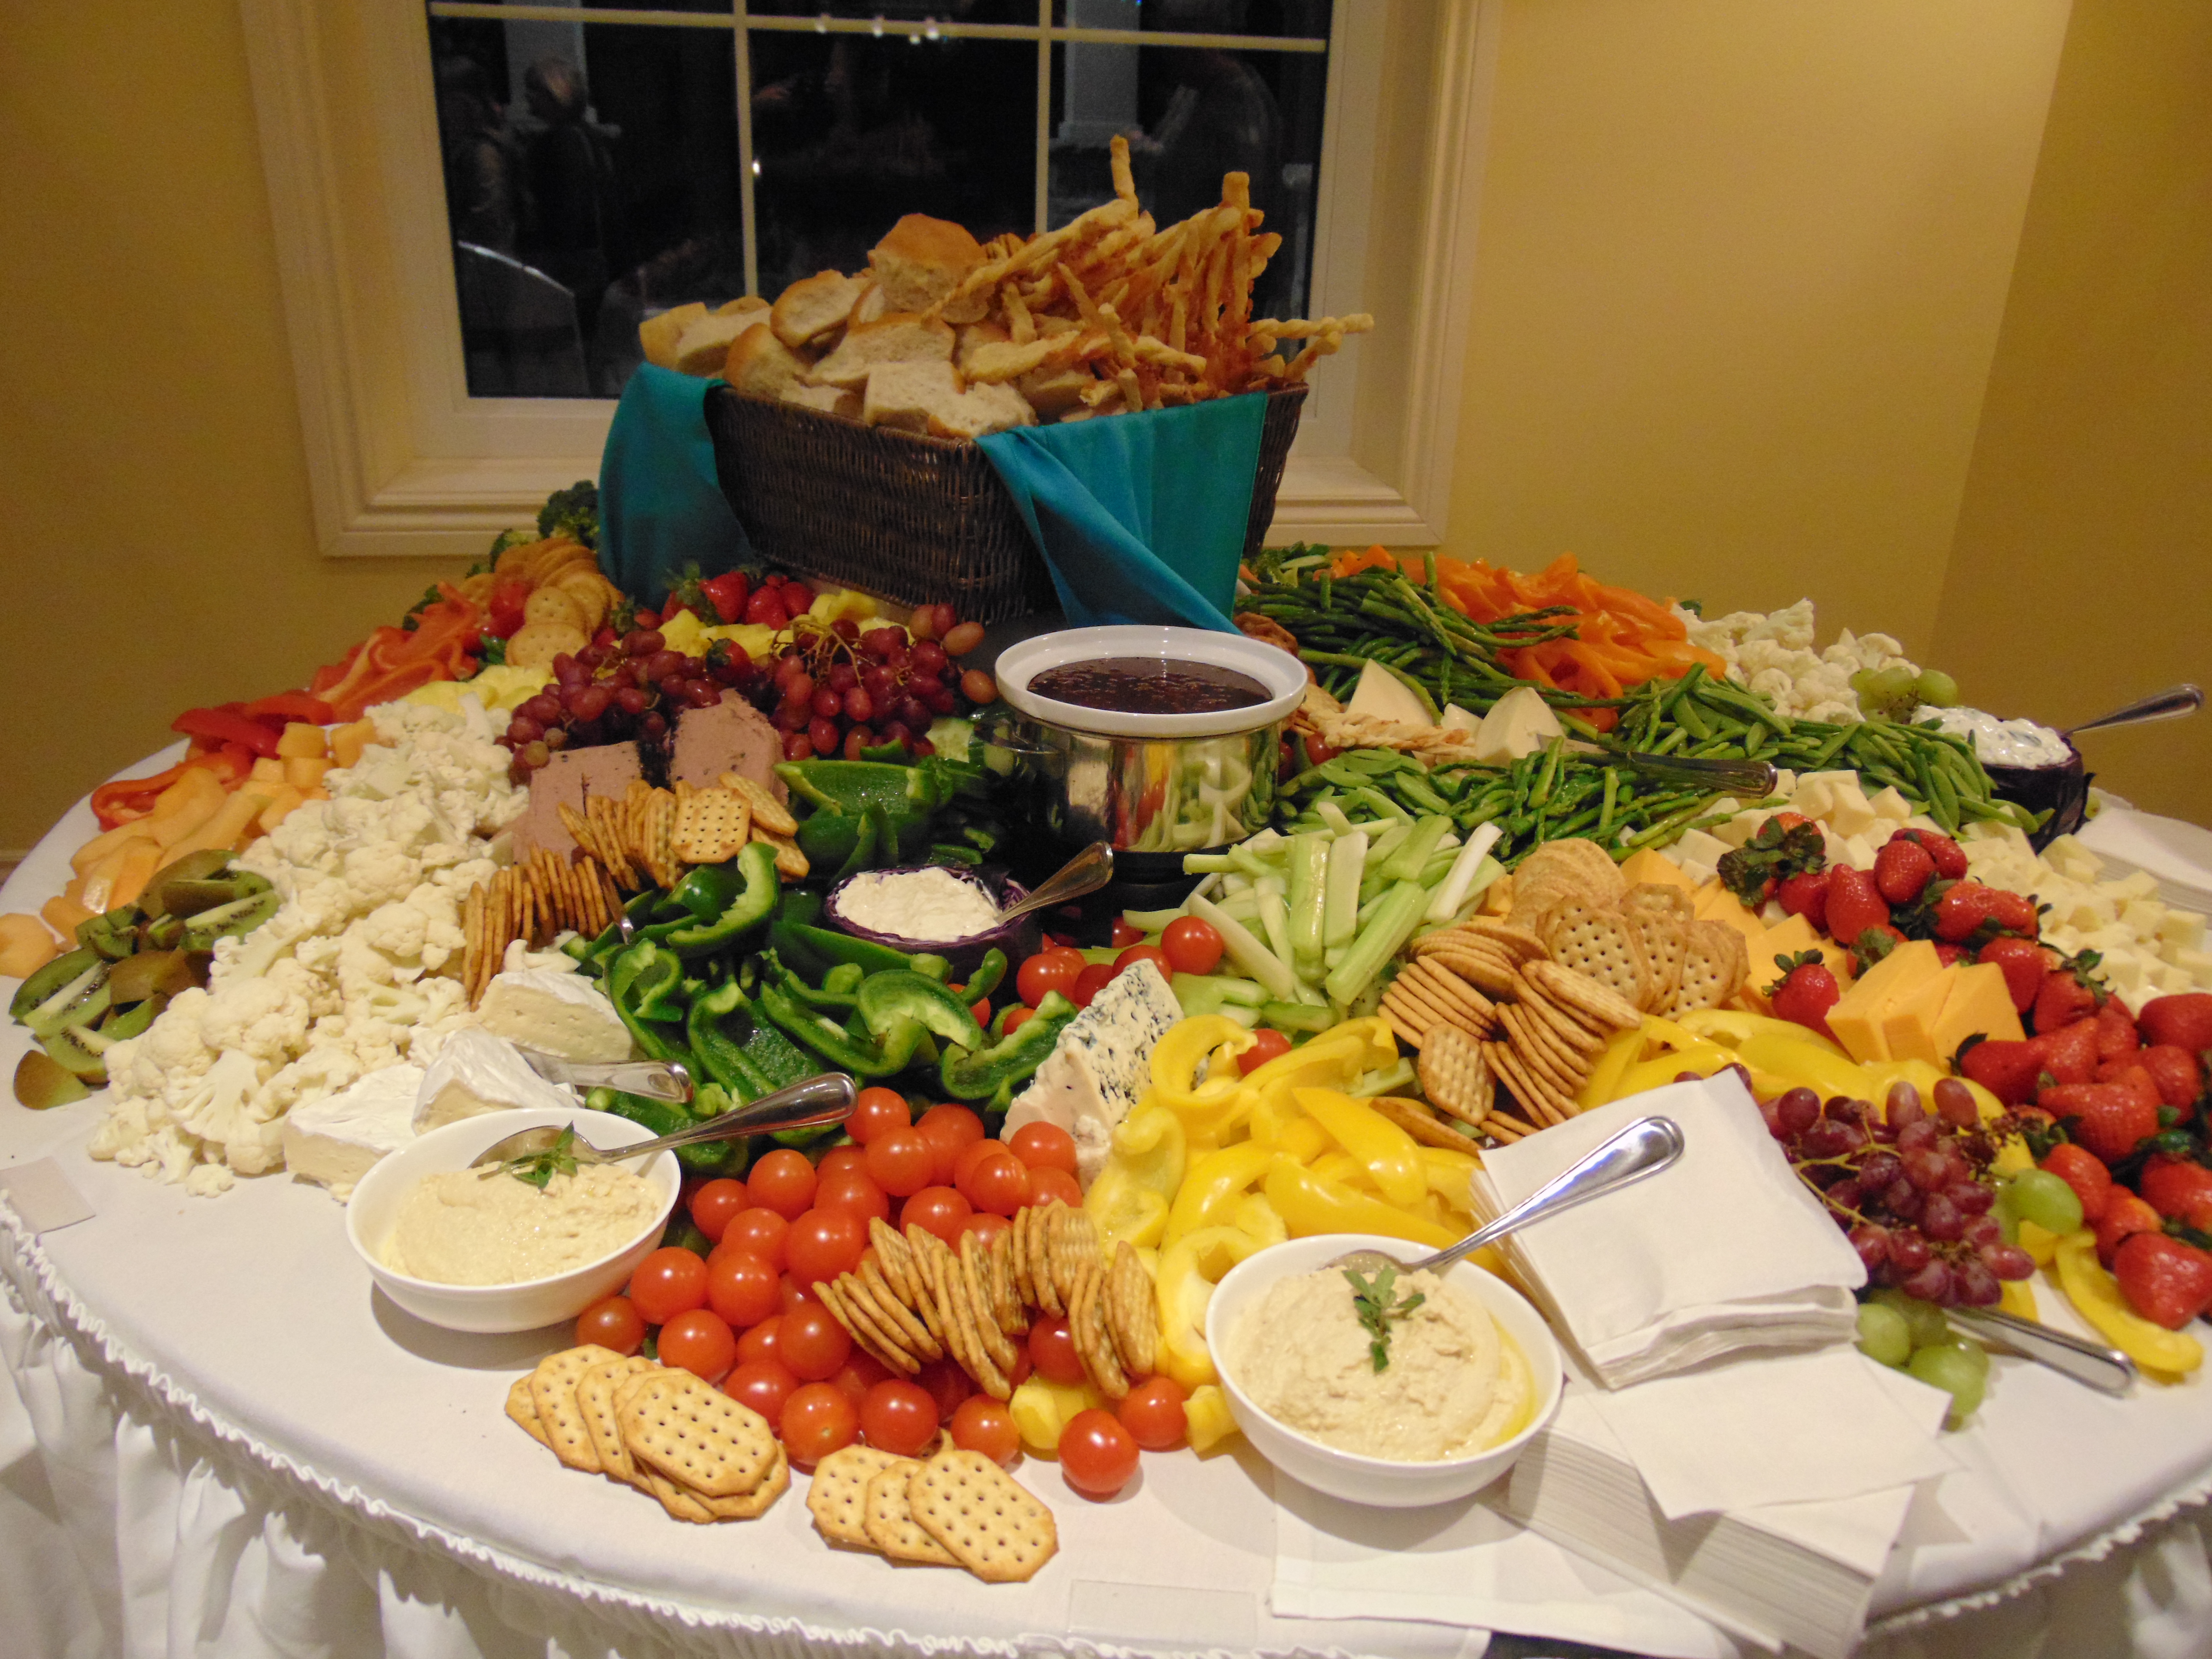 Orchard View by the Mississippi - Veggie, dip, crackers, cheese display on large round table. Food is our focus